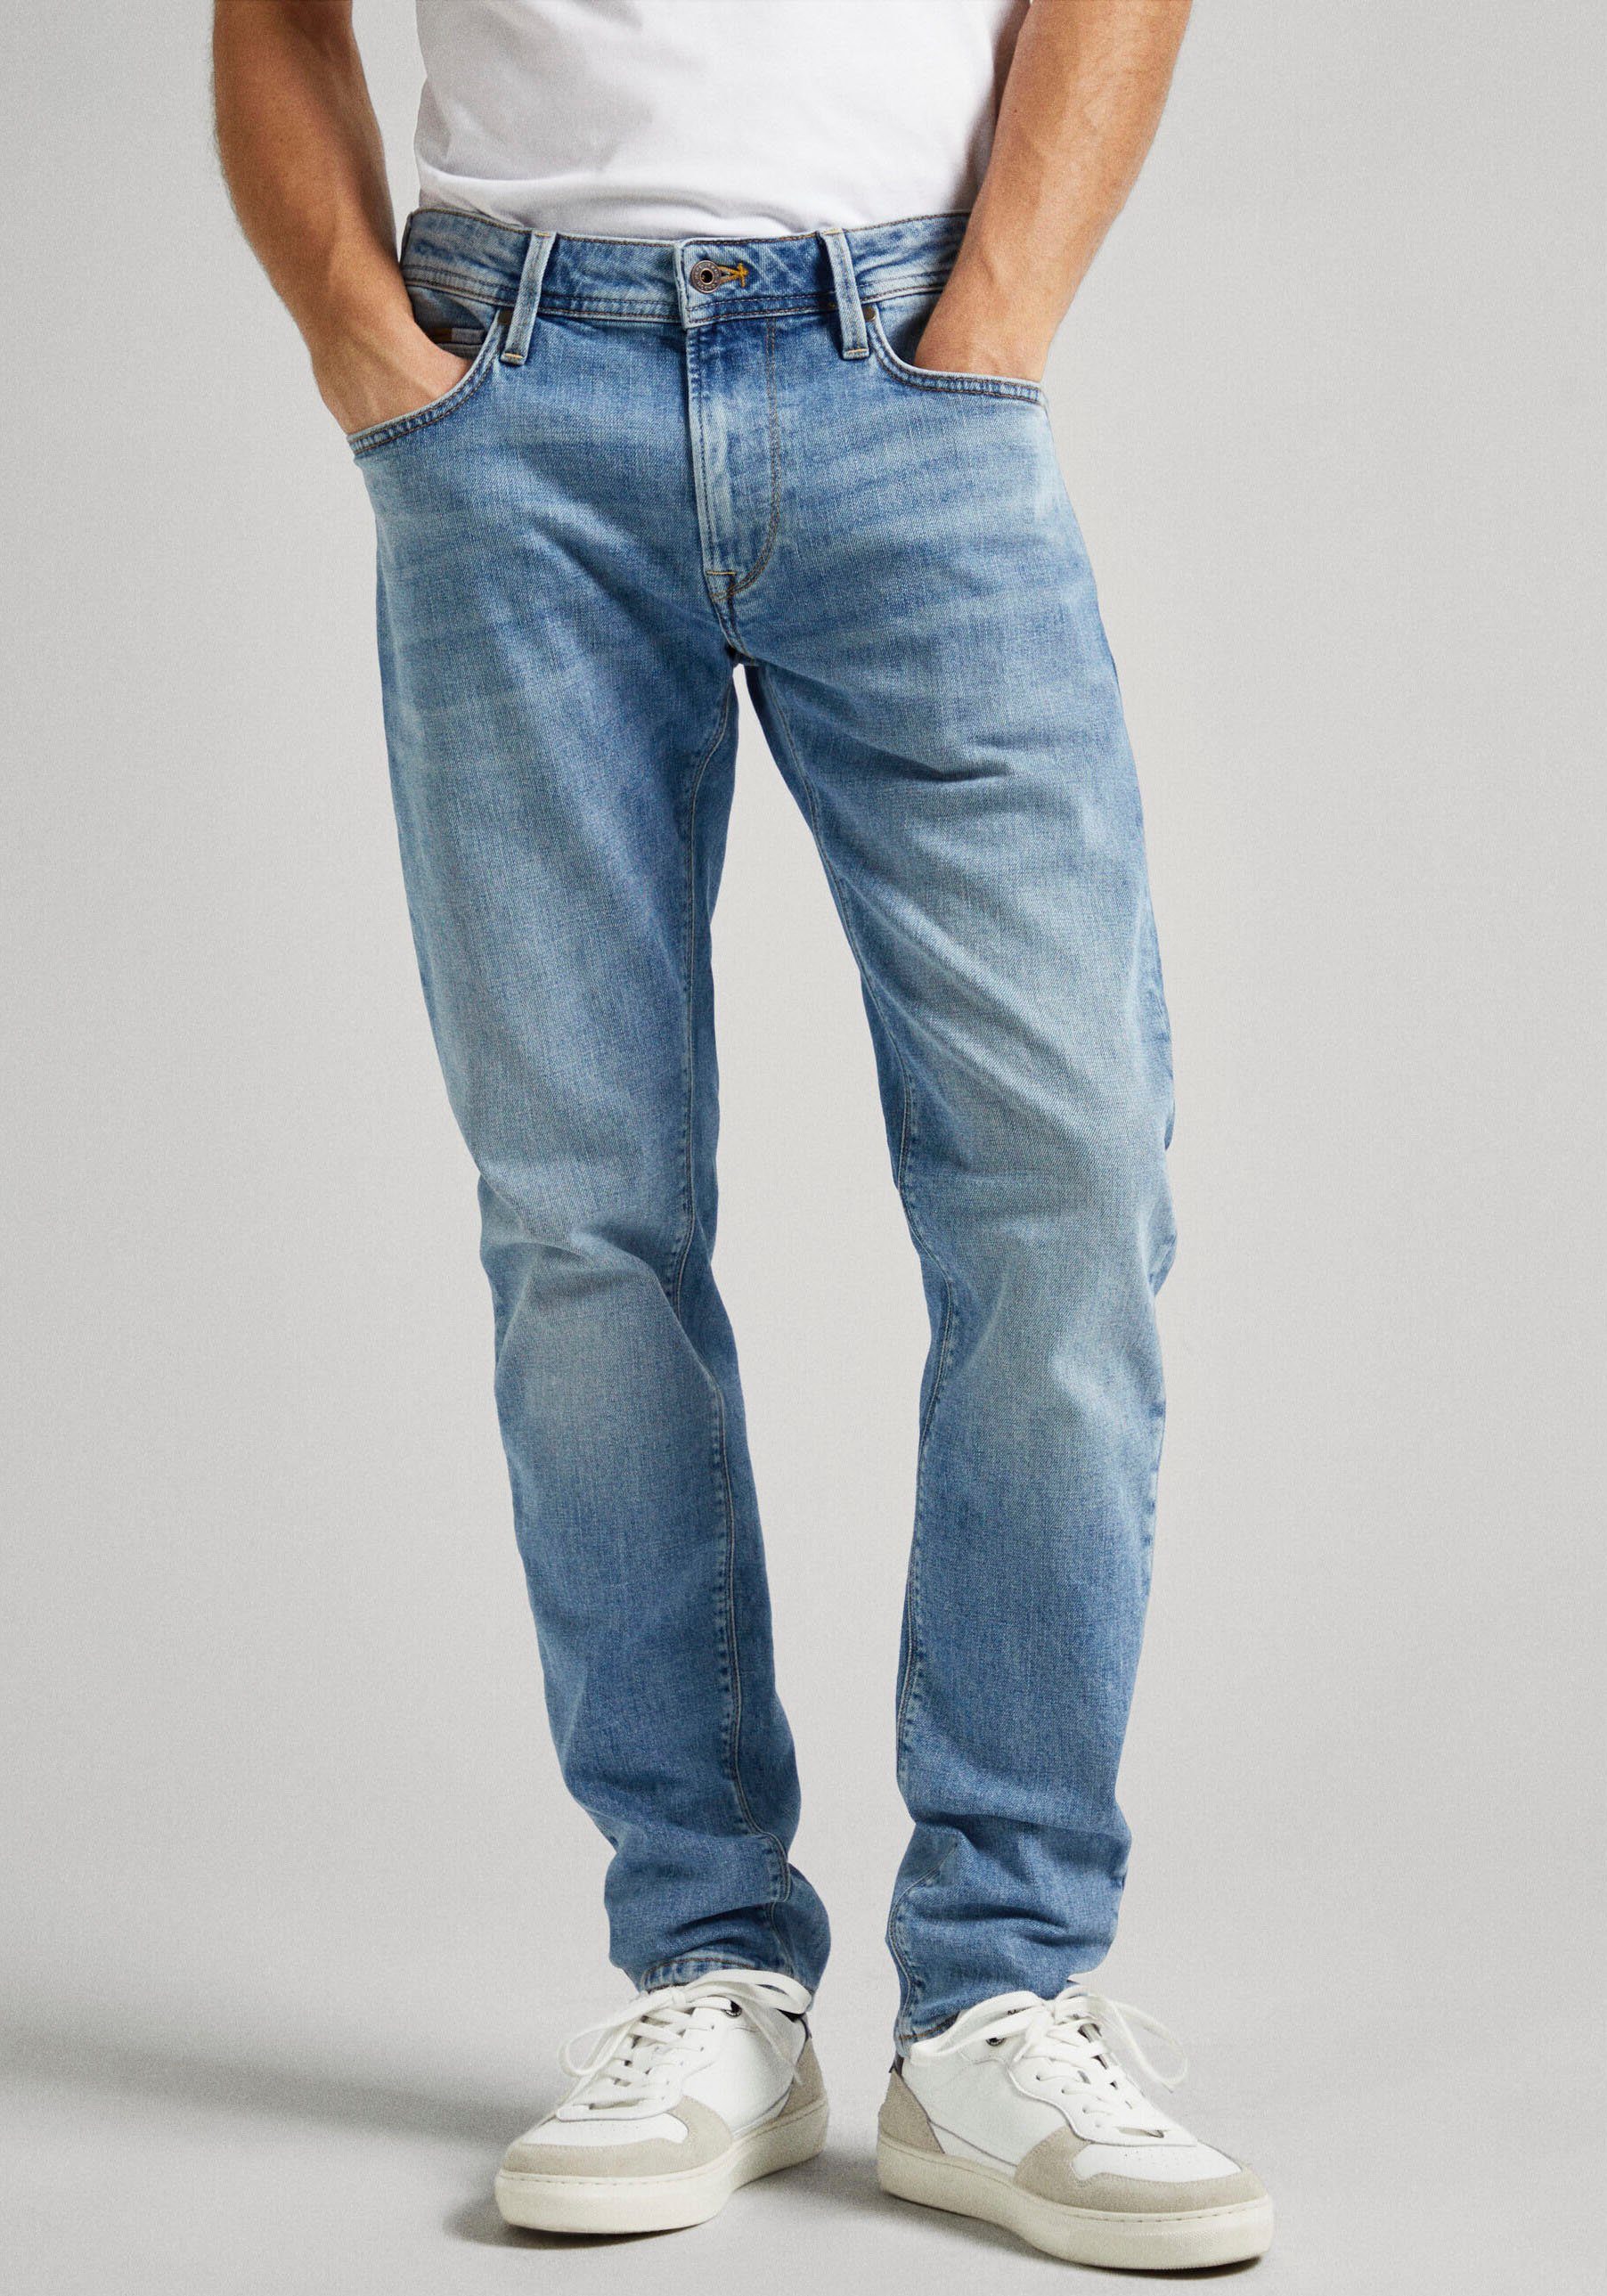 Pepe Jeans Tapered jeans